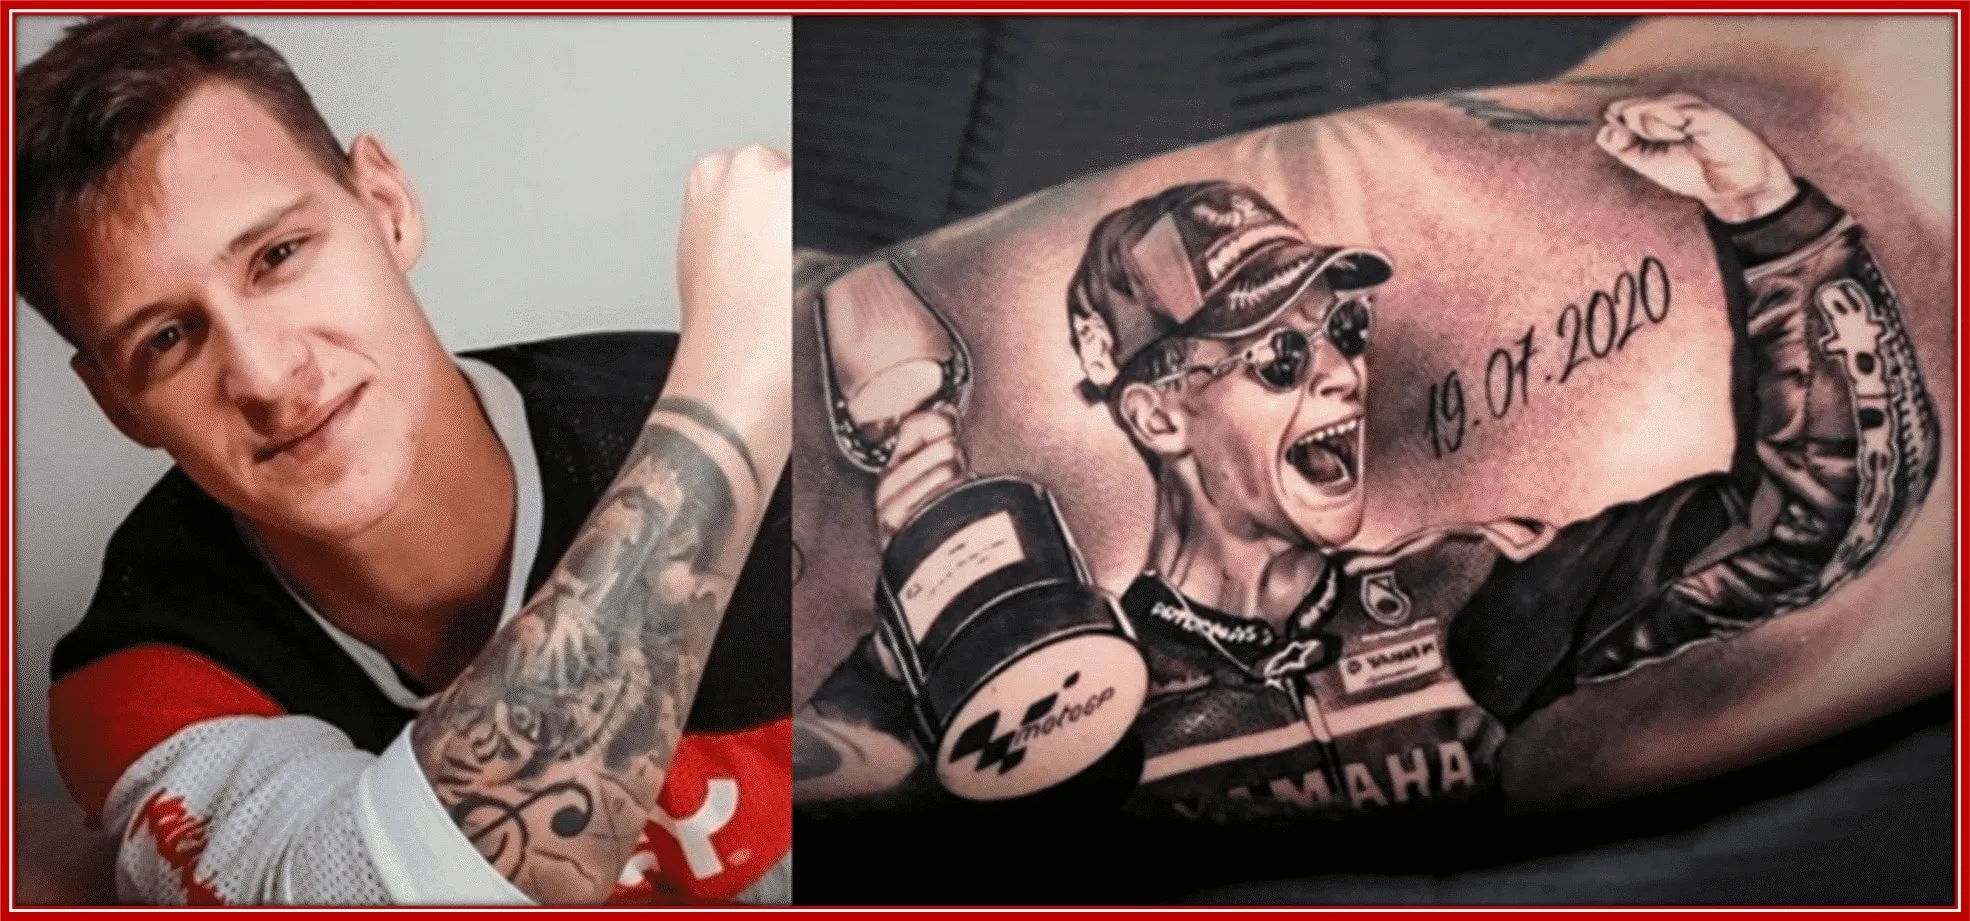 Quartararo immortalized his first victory with a tattoo.